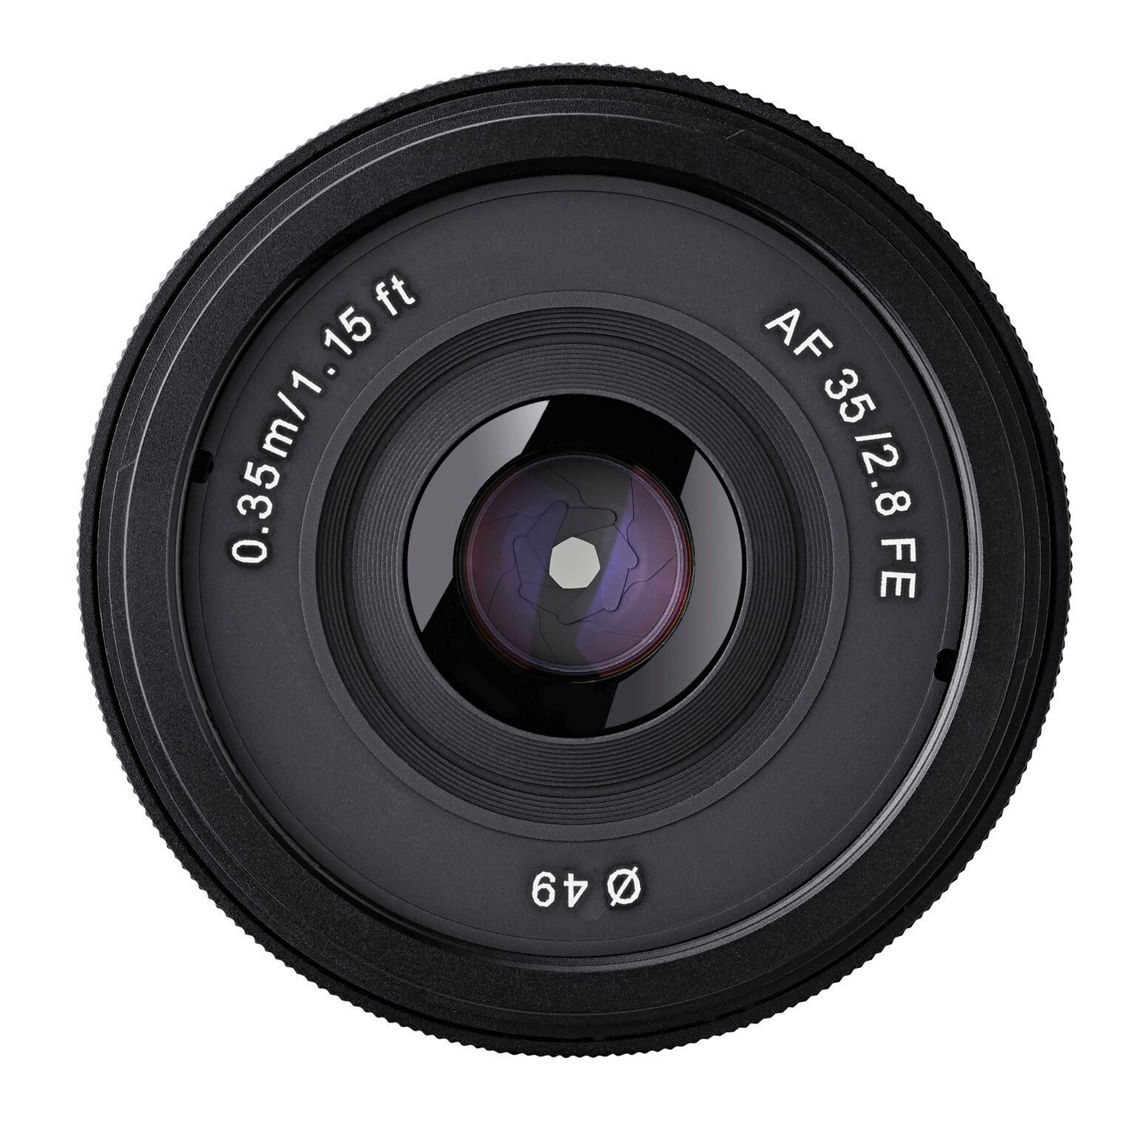 Rokinon 35mm F2.8 AF Compact Full Frame Wide Angle Lens for Sony E - Image 5 of 5